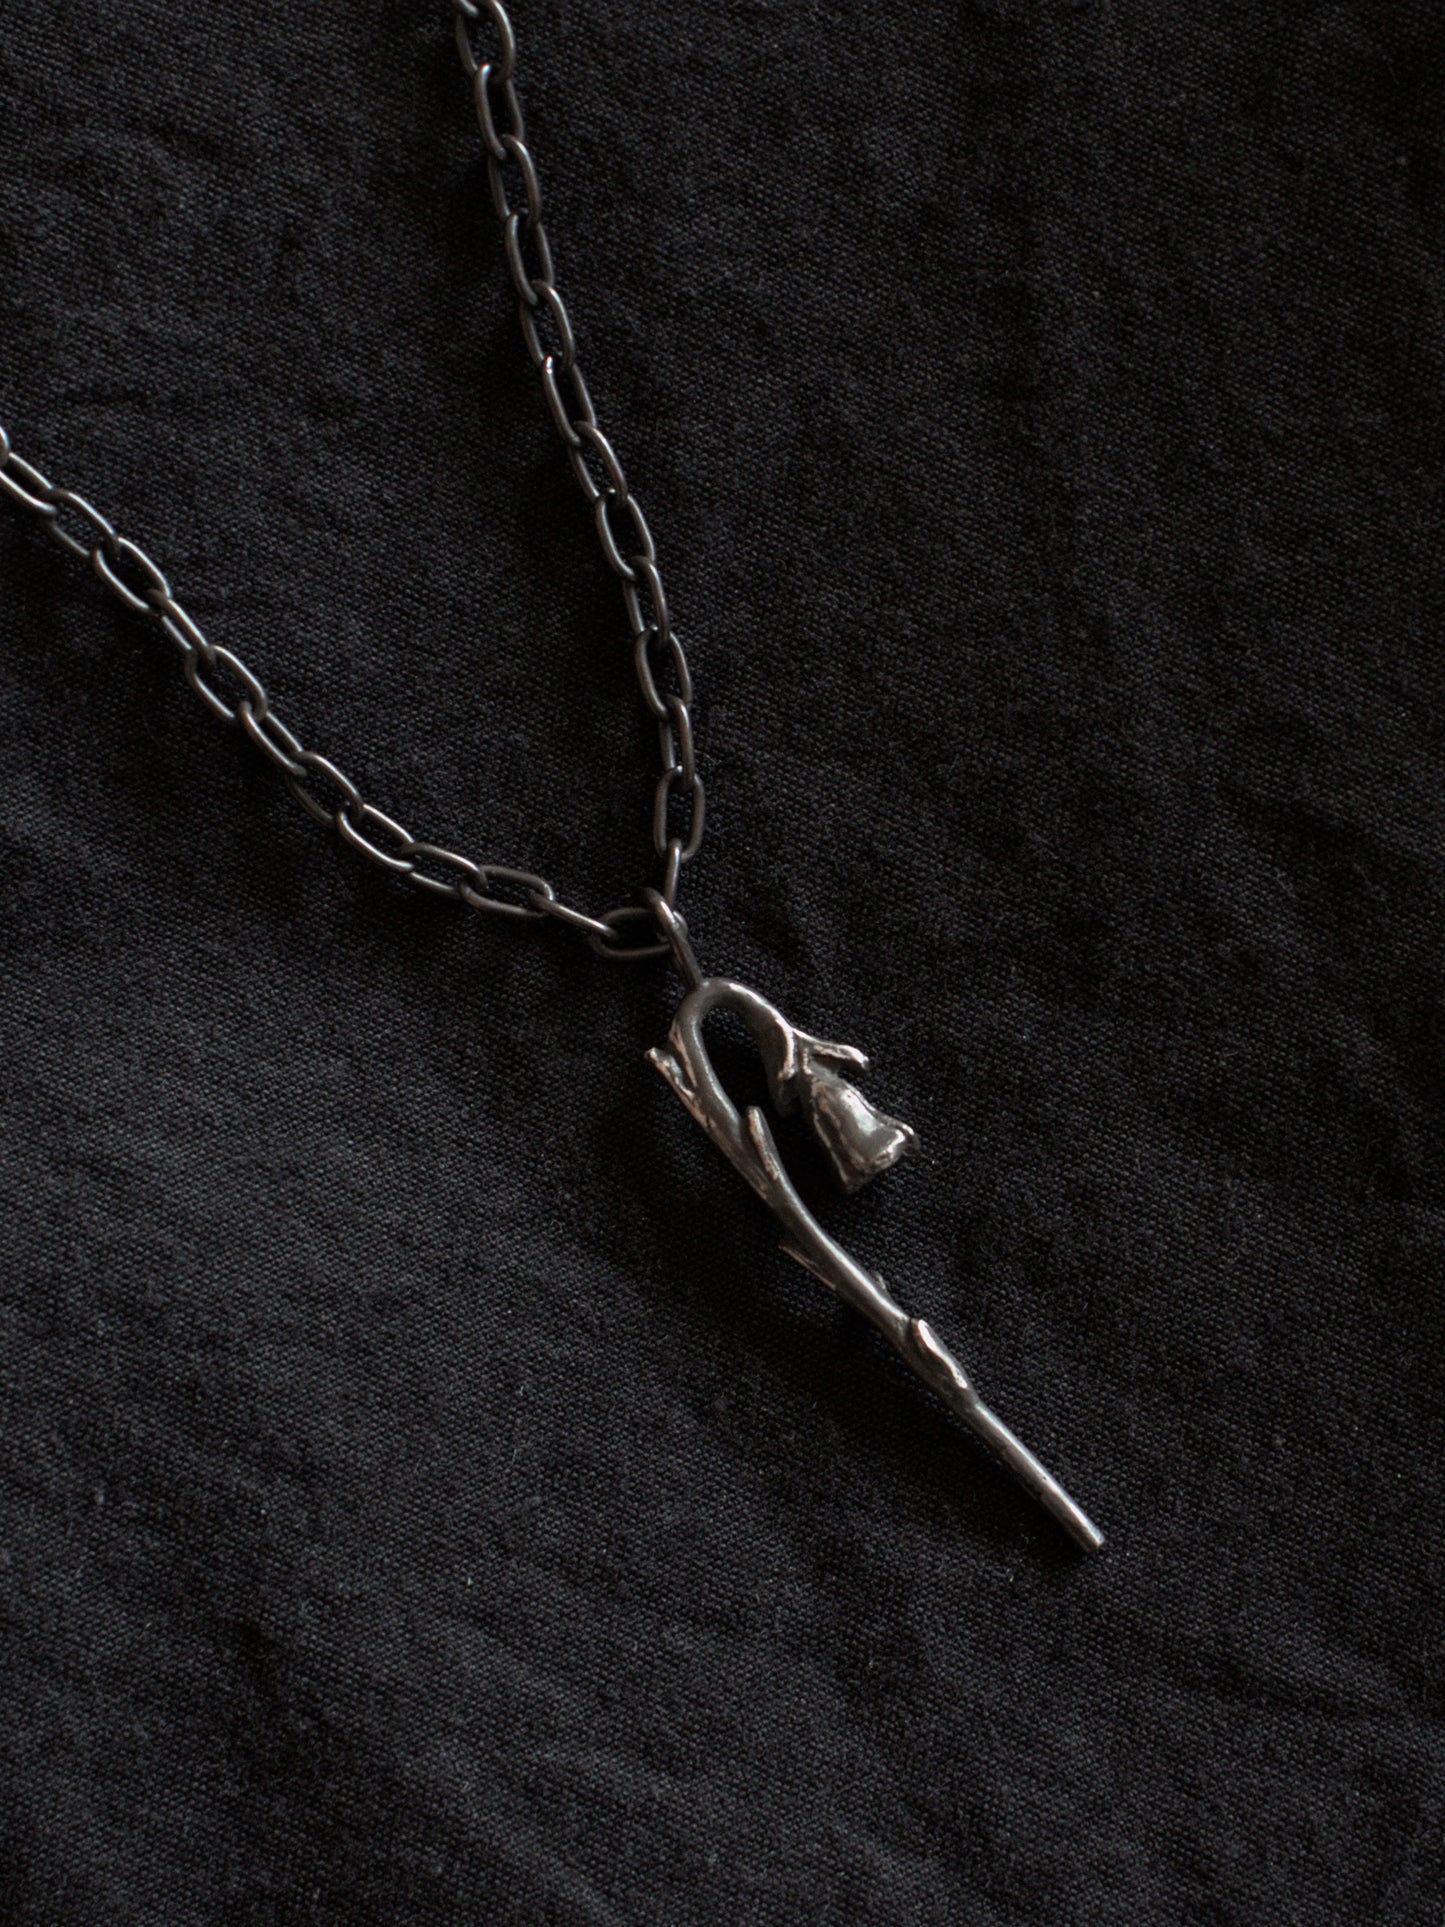 Ghost Pipe necklace